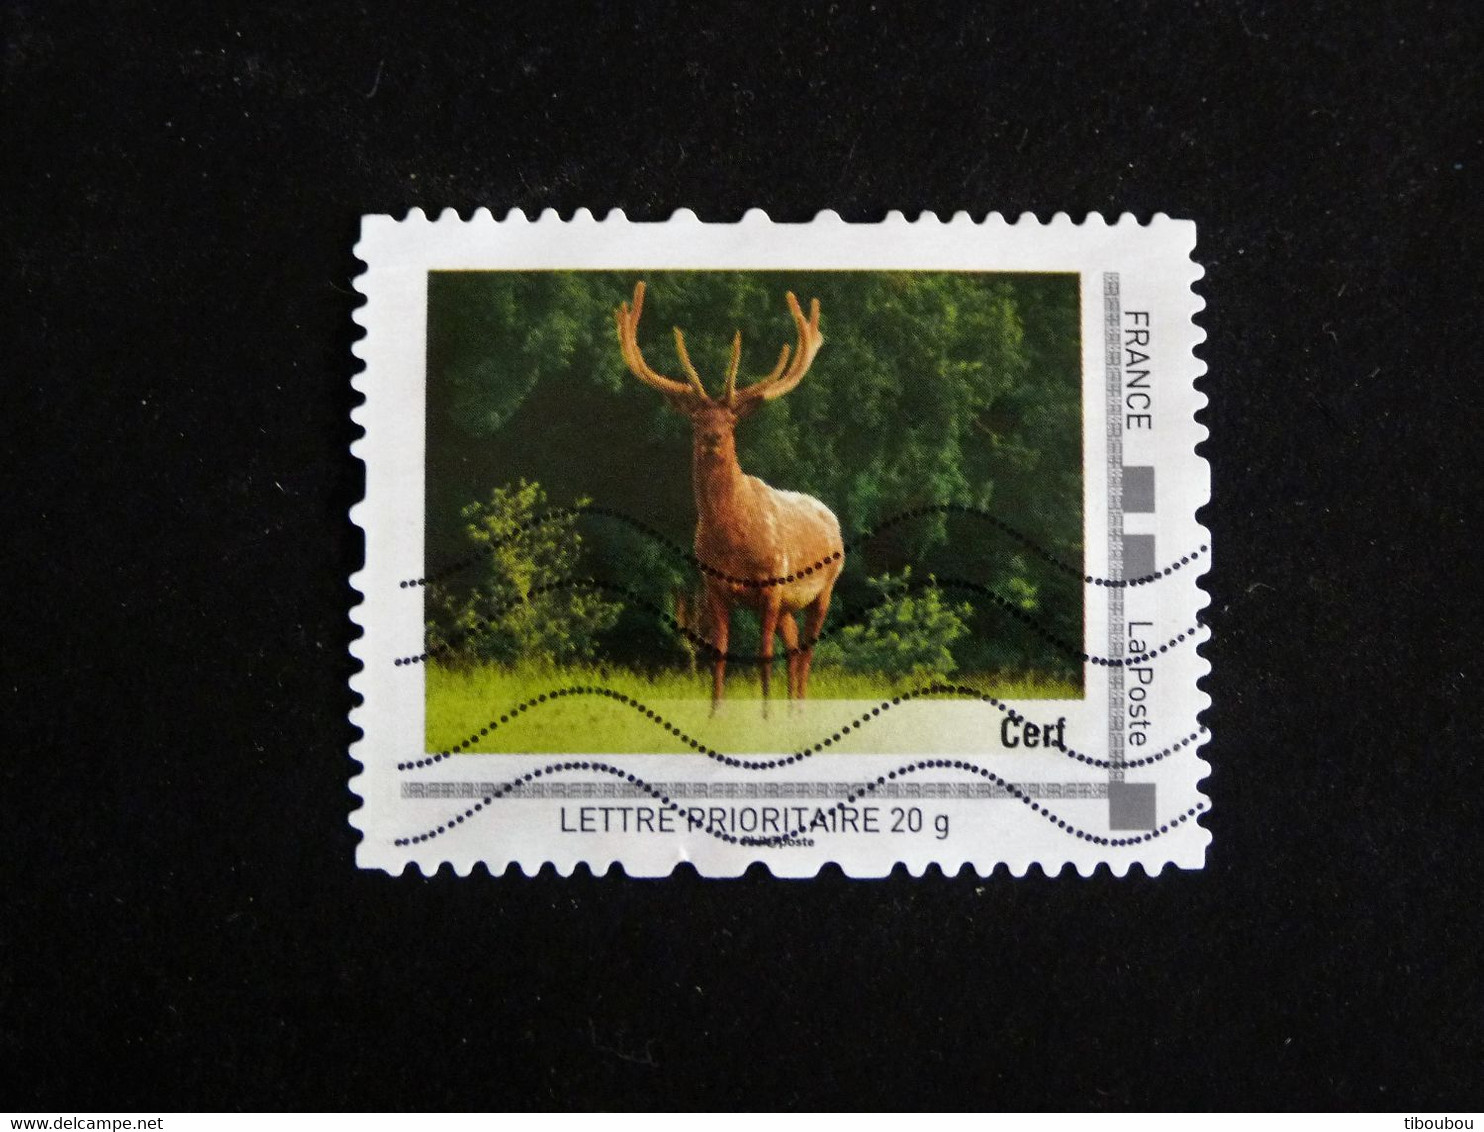 FRANCE MONTIMBRAMOI COLLECTOR OBLITERE - CERF DEER STAG - Collectors